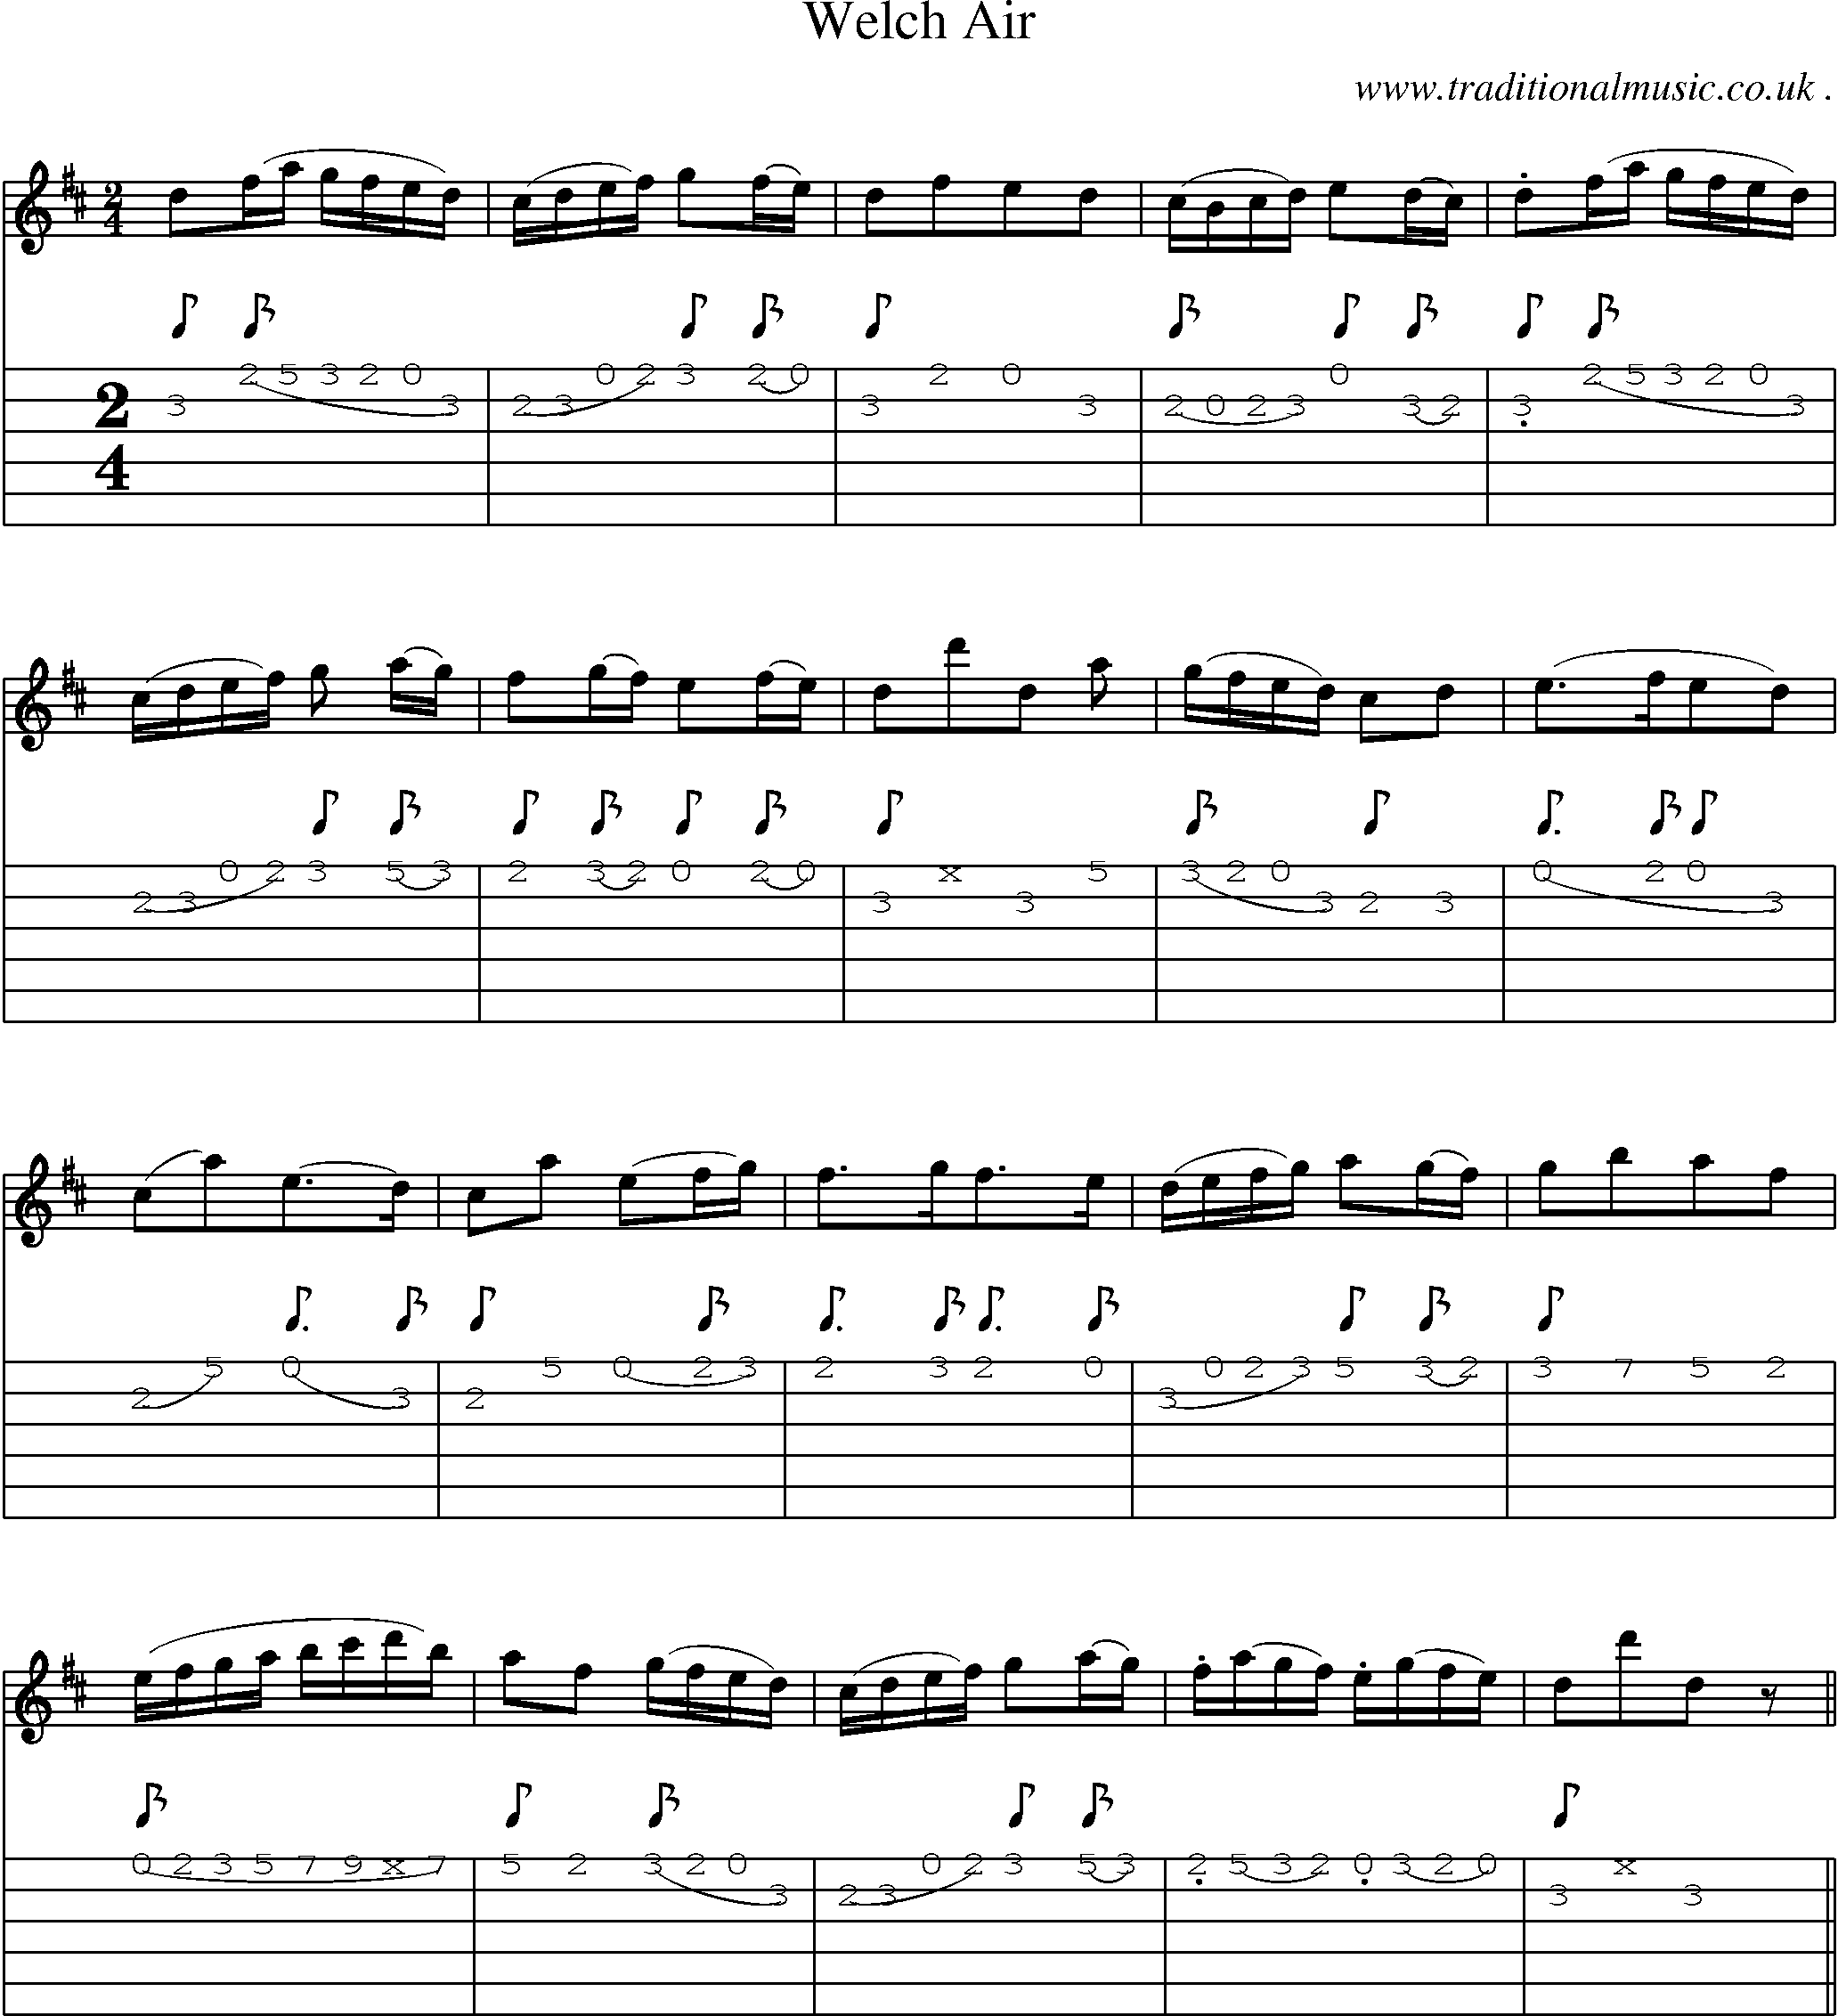 Sheet-Music and Guitar Tabs for Welch Air